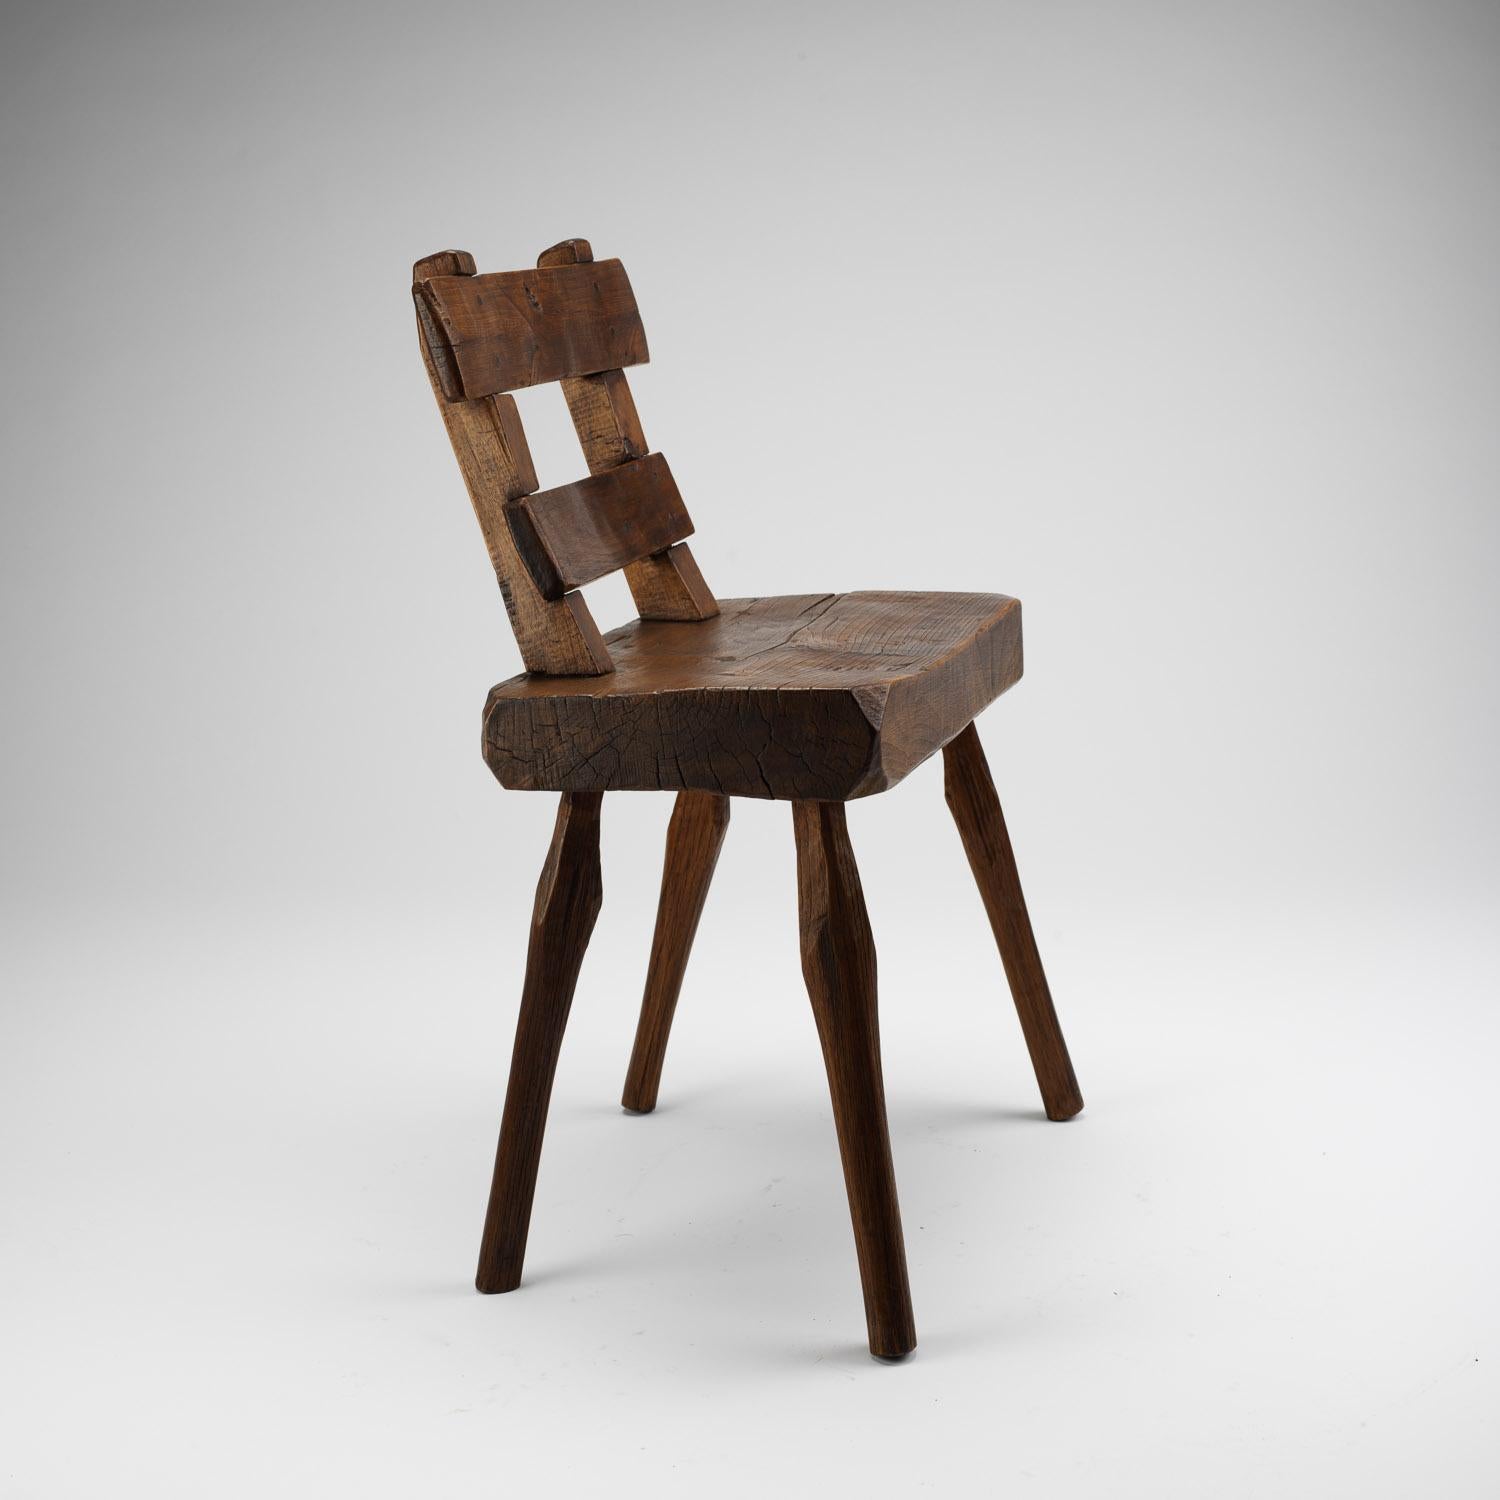 A primitive handmade ladder-back alpine chair in solid ash, France, early 1900s.

         